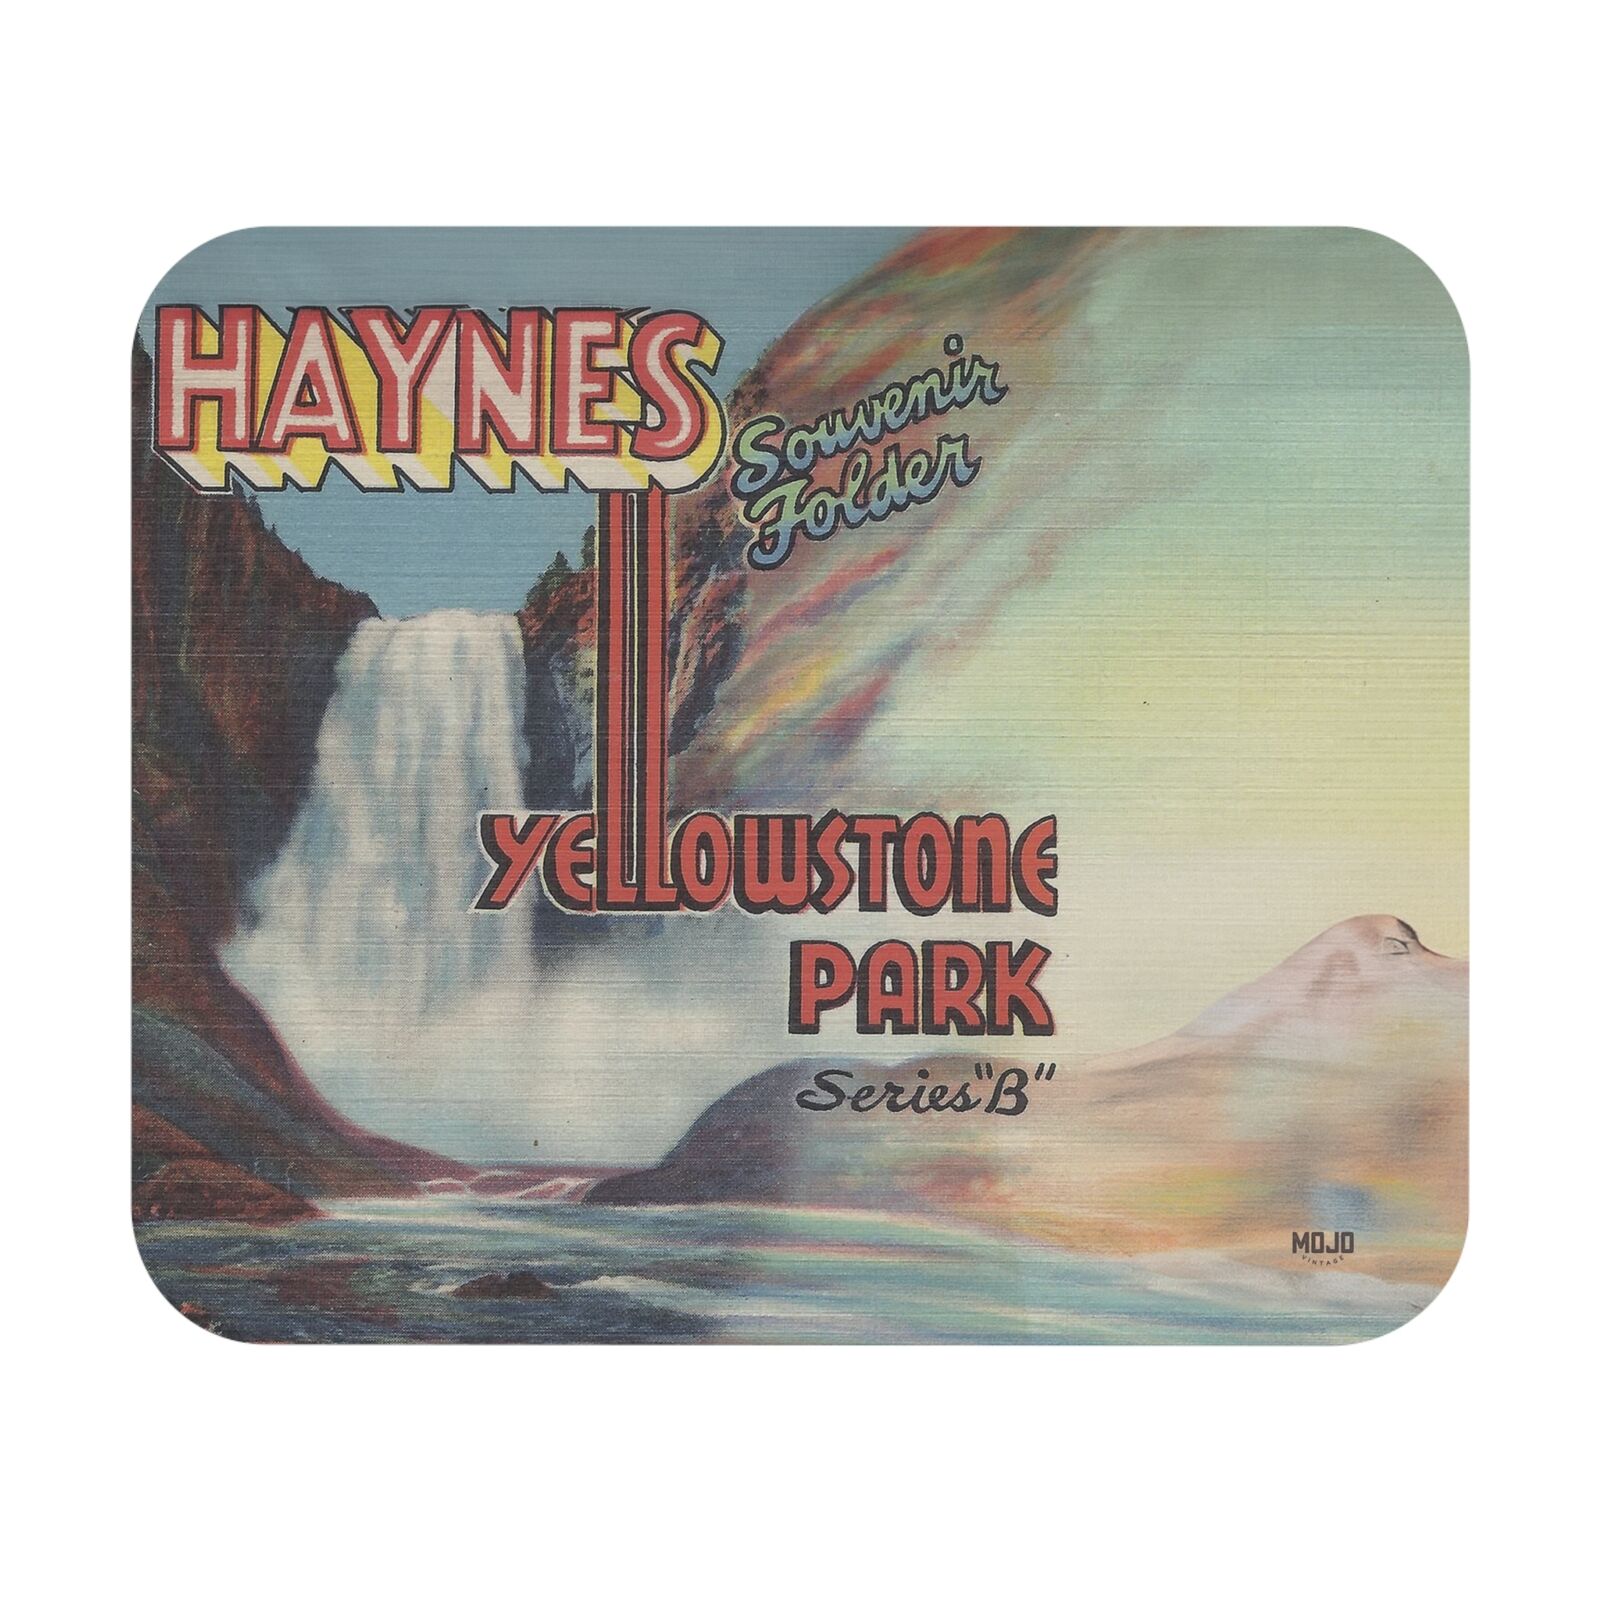 Yellowstone Park Mouse Pad, Vintage Postcard Print, US States-Cities, 9\'\' x 8\'\'